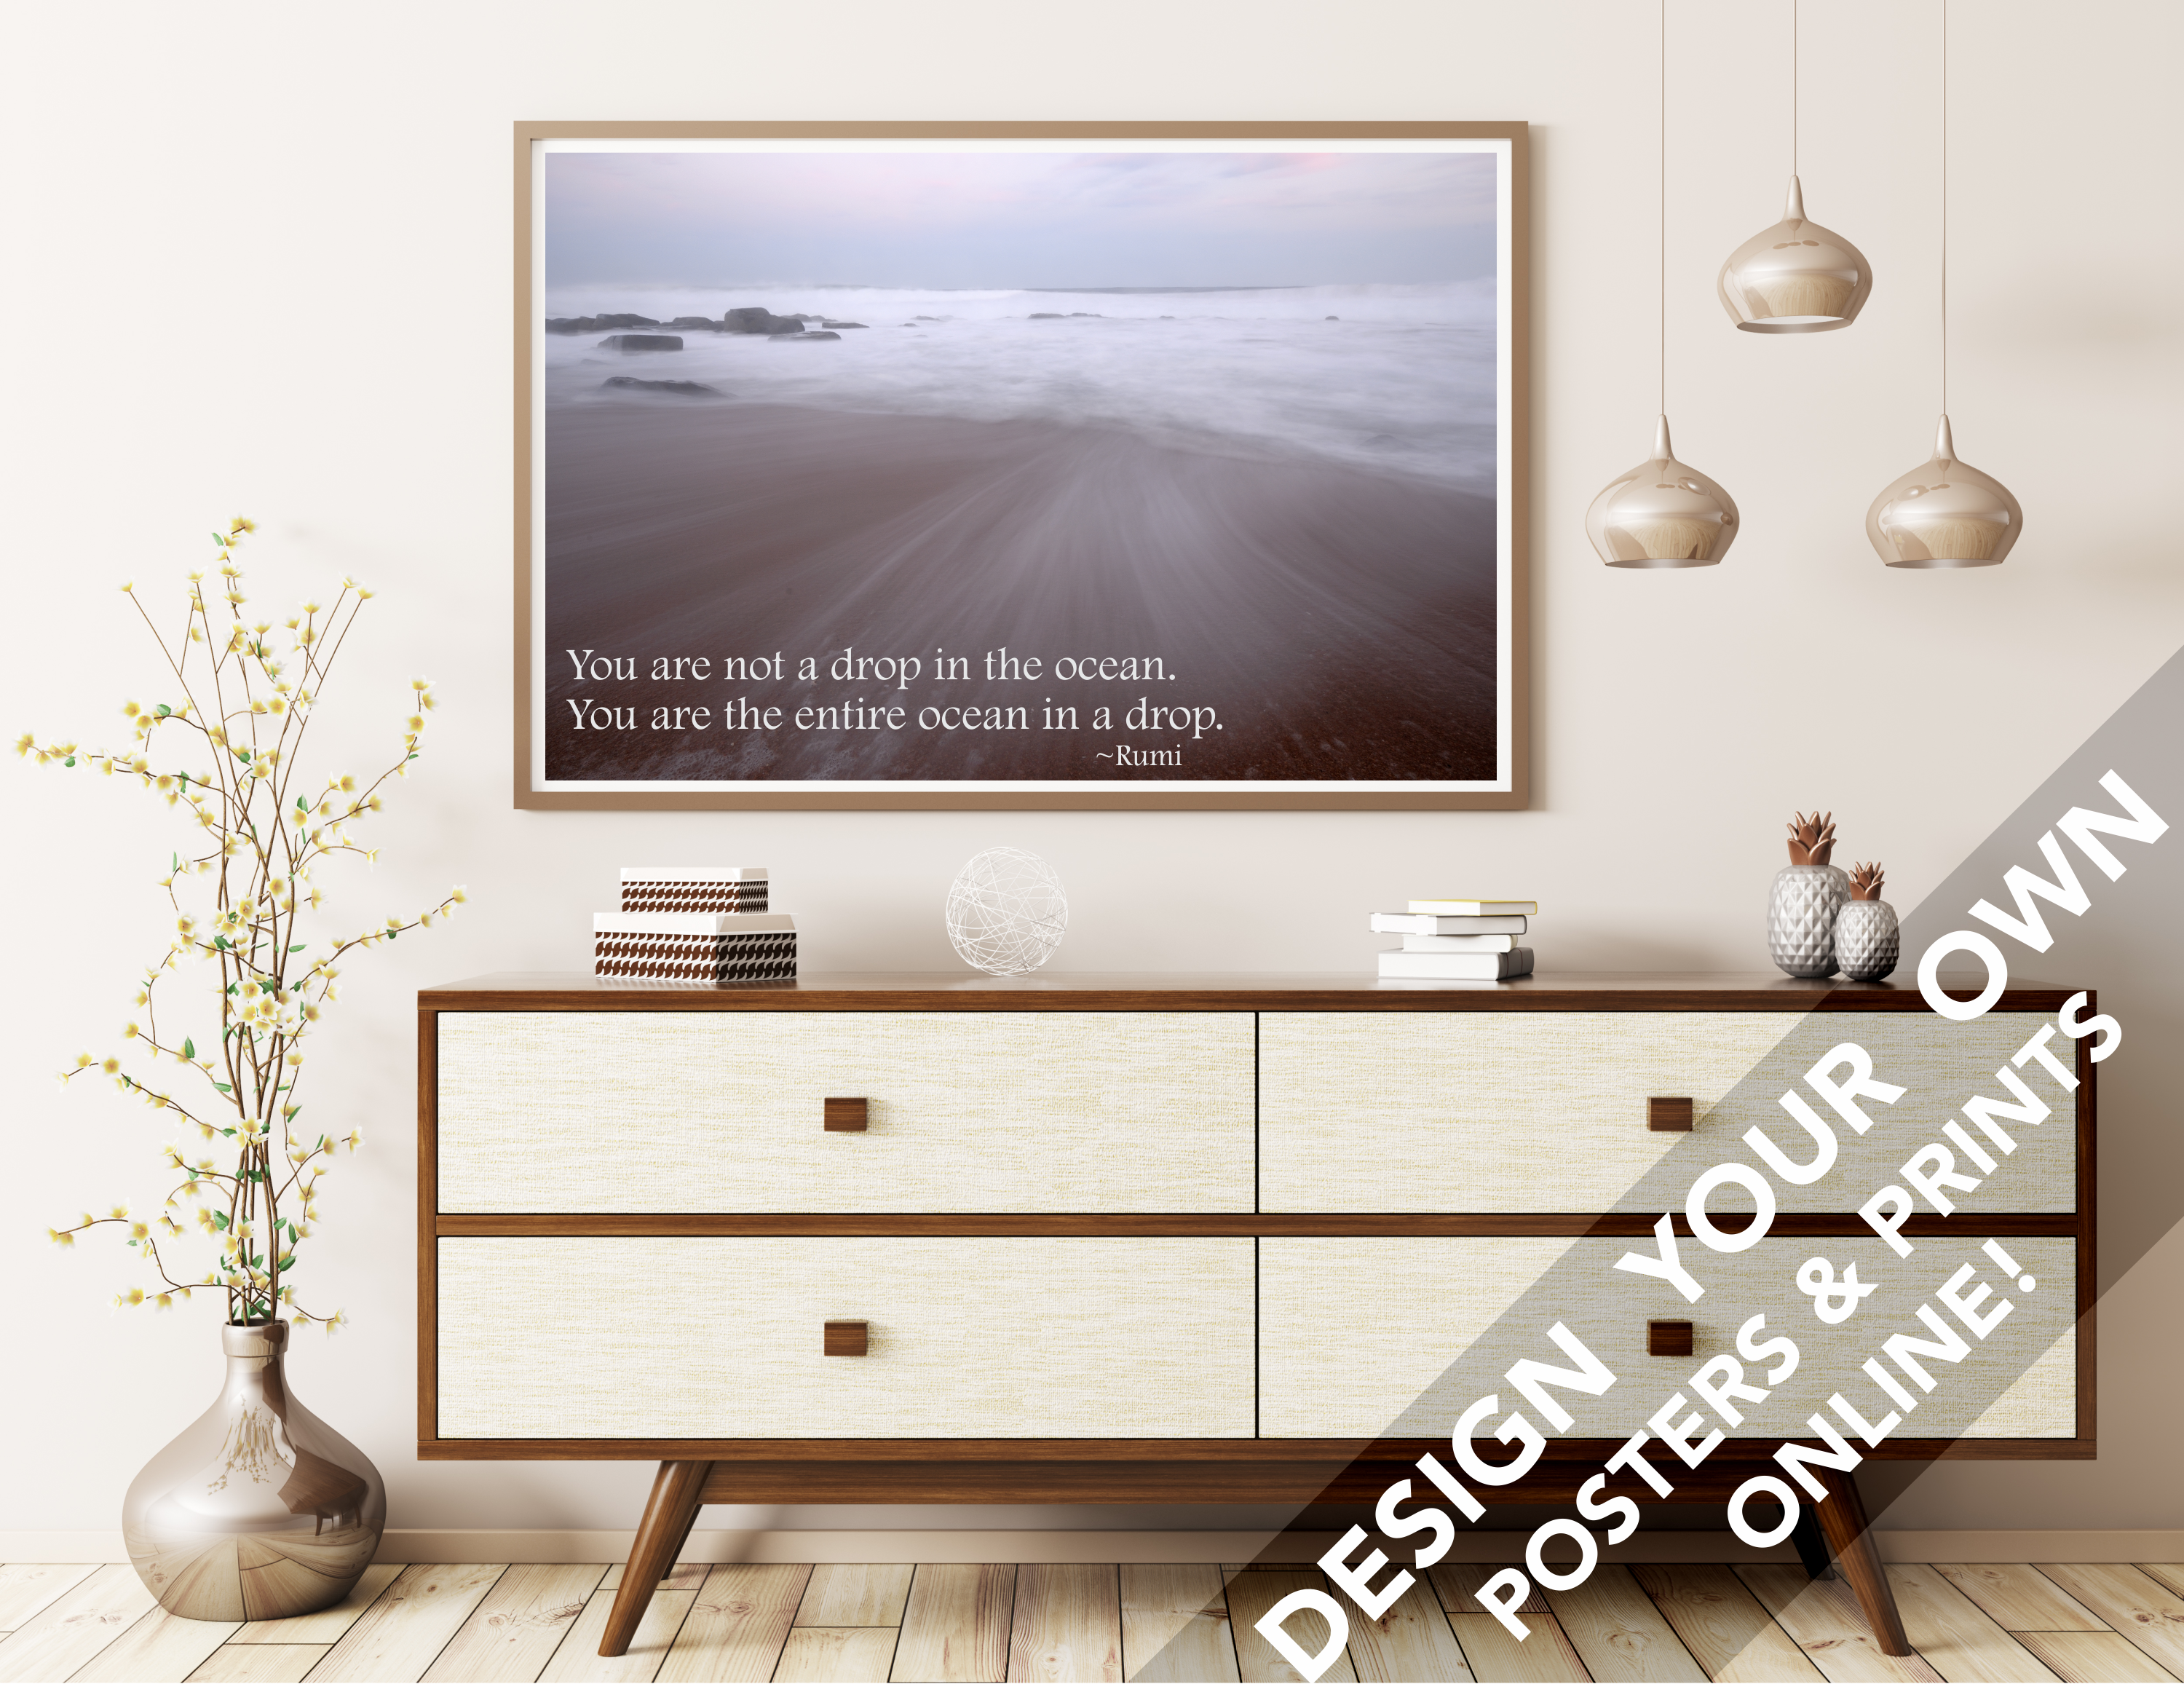 Personalized High Quality Posters Art Prints Design Your Own